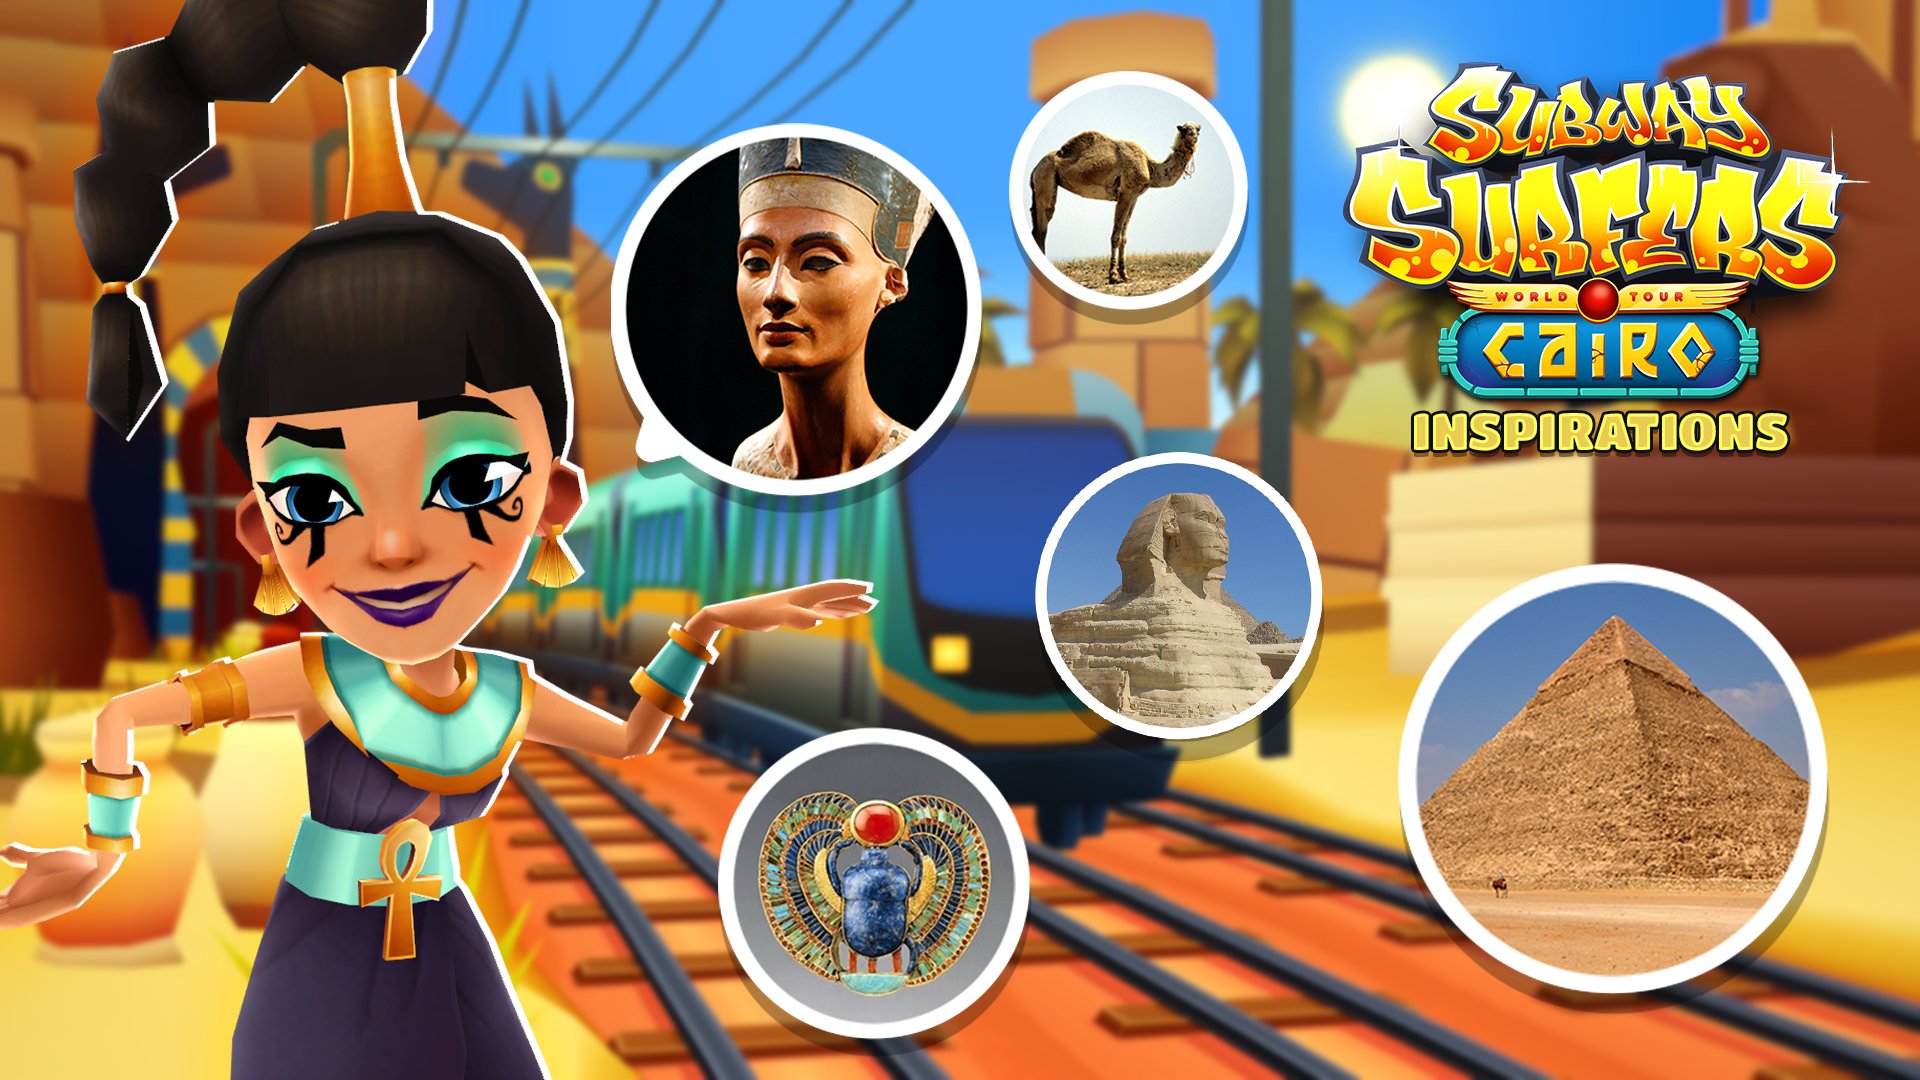 Subway Surfers on X: Here's what inspired our artists as they